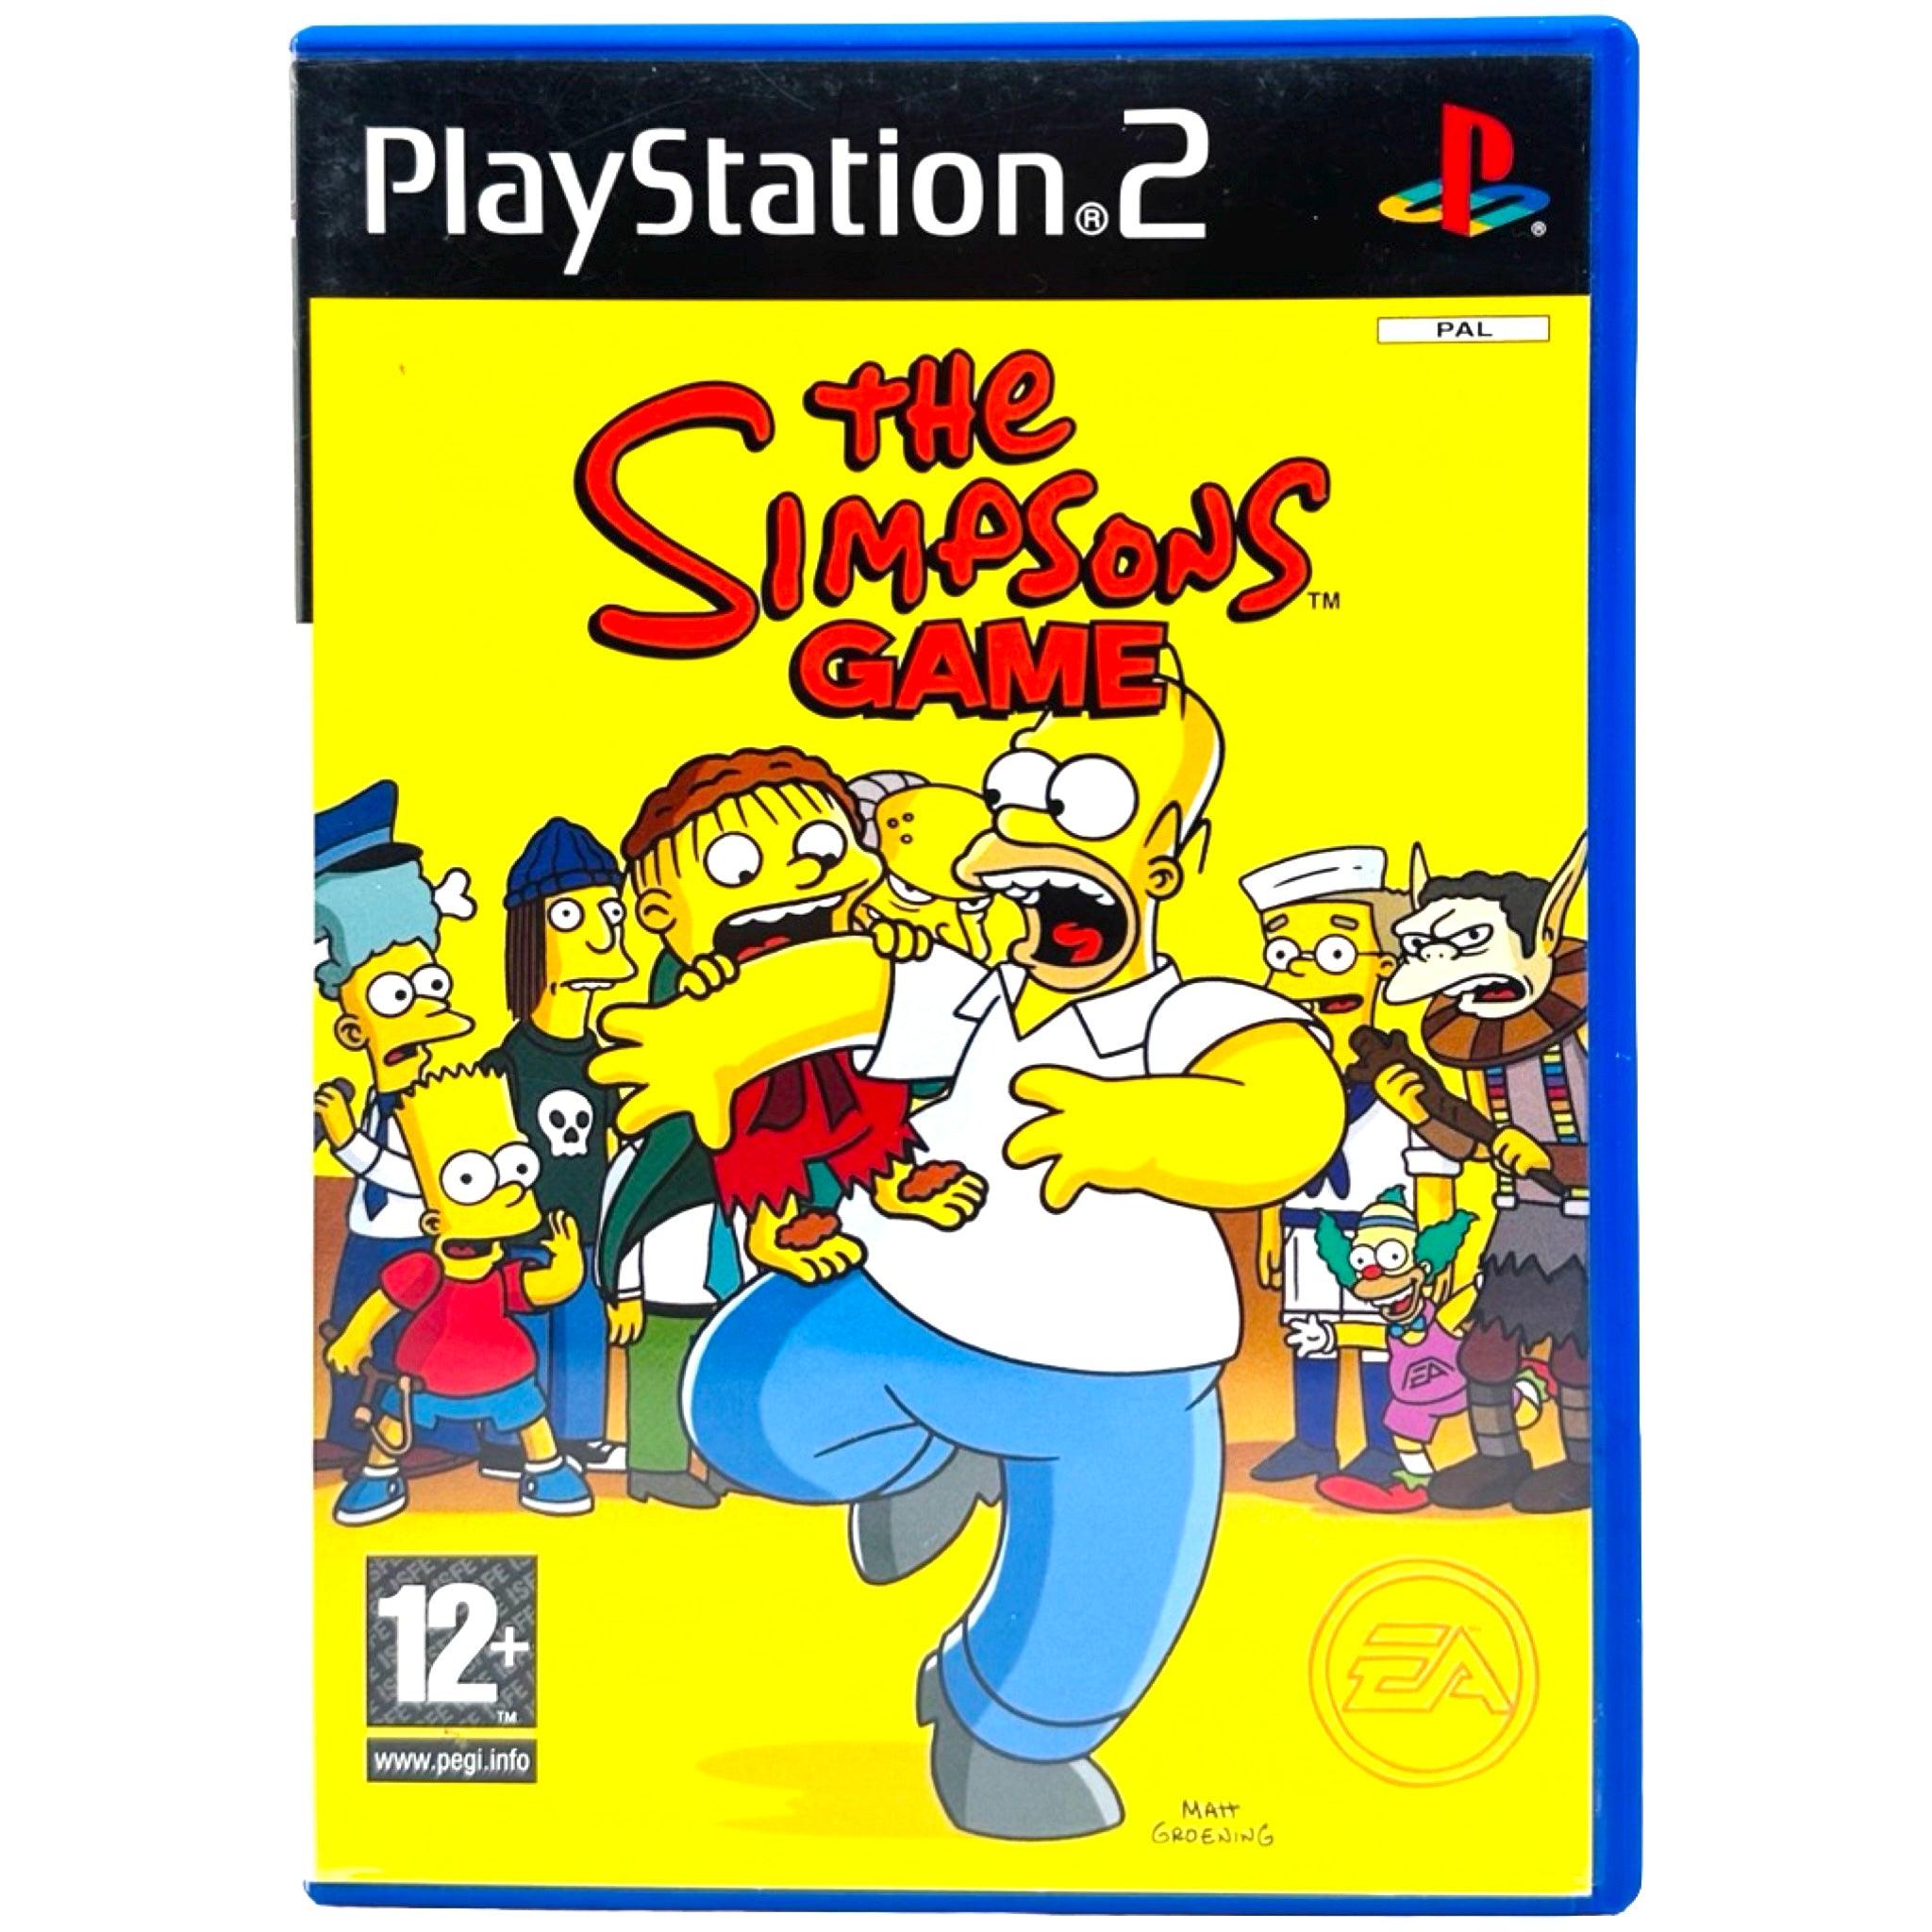 PS2: The Simpsons Game - RetroGaming.no